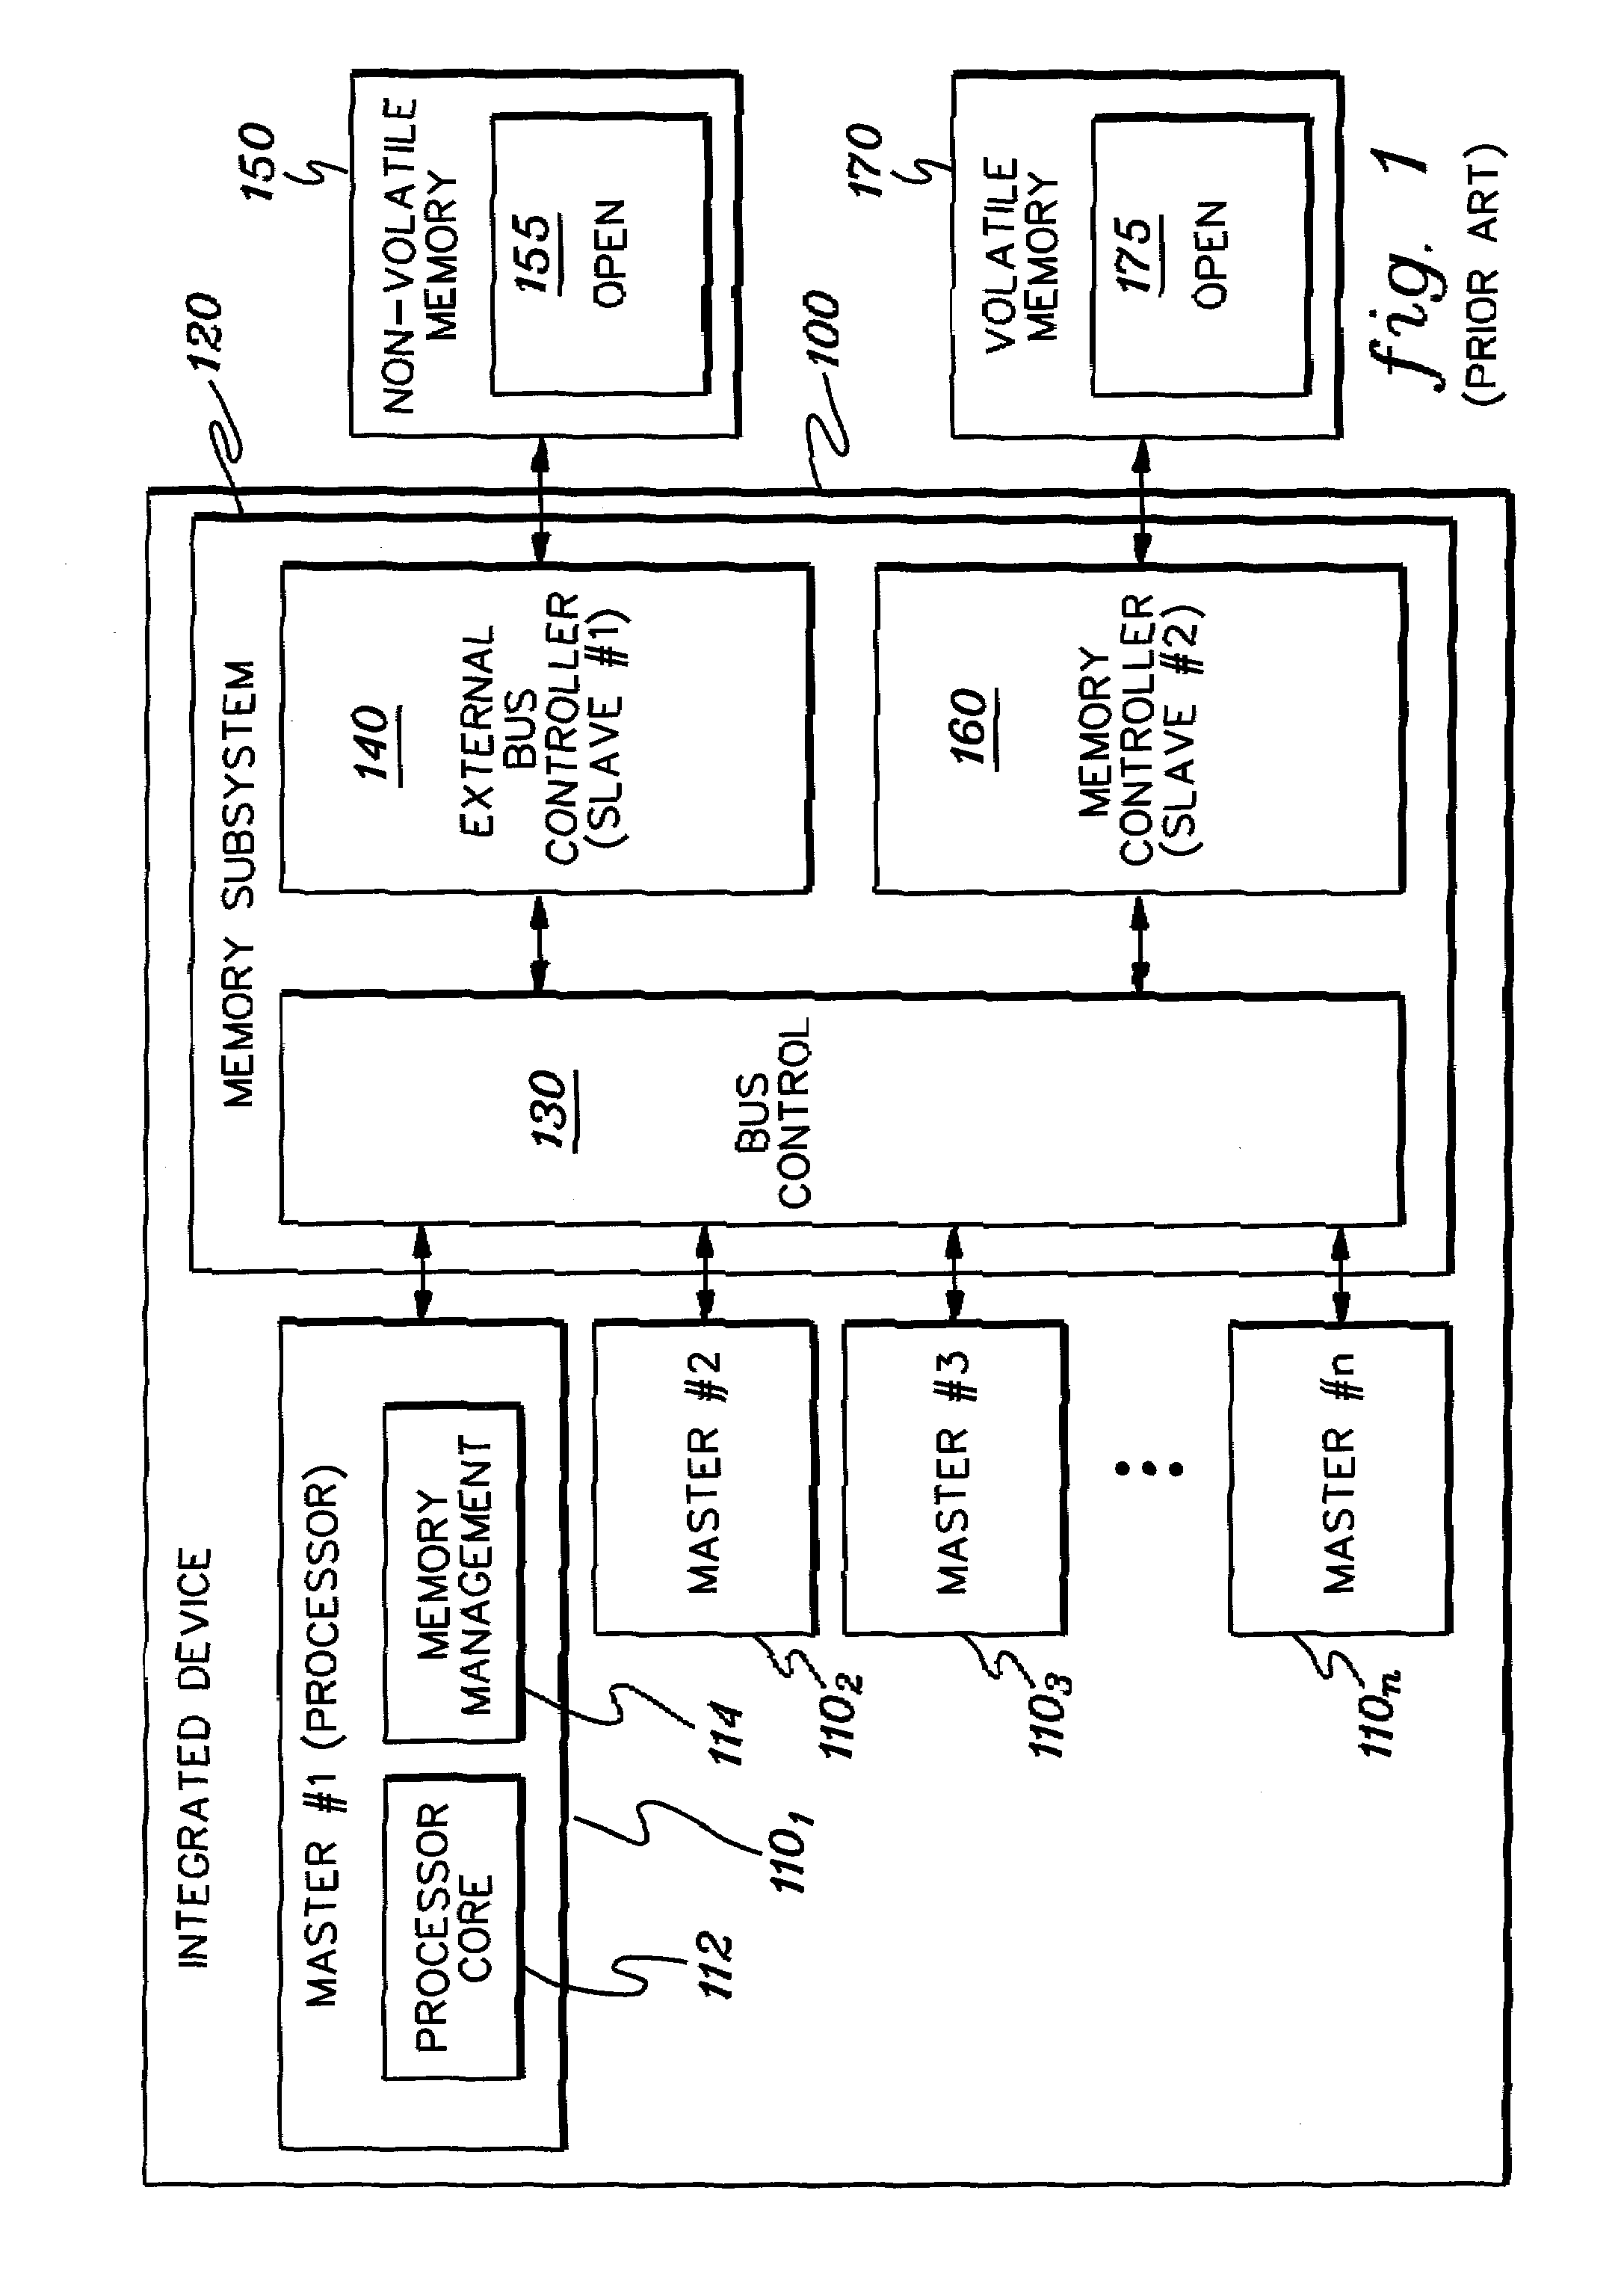 Control function implementing selective transparent data authentication within an integrated system